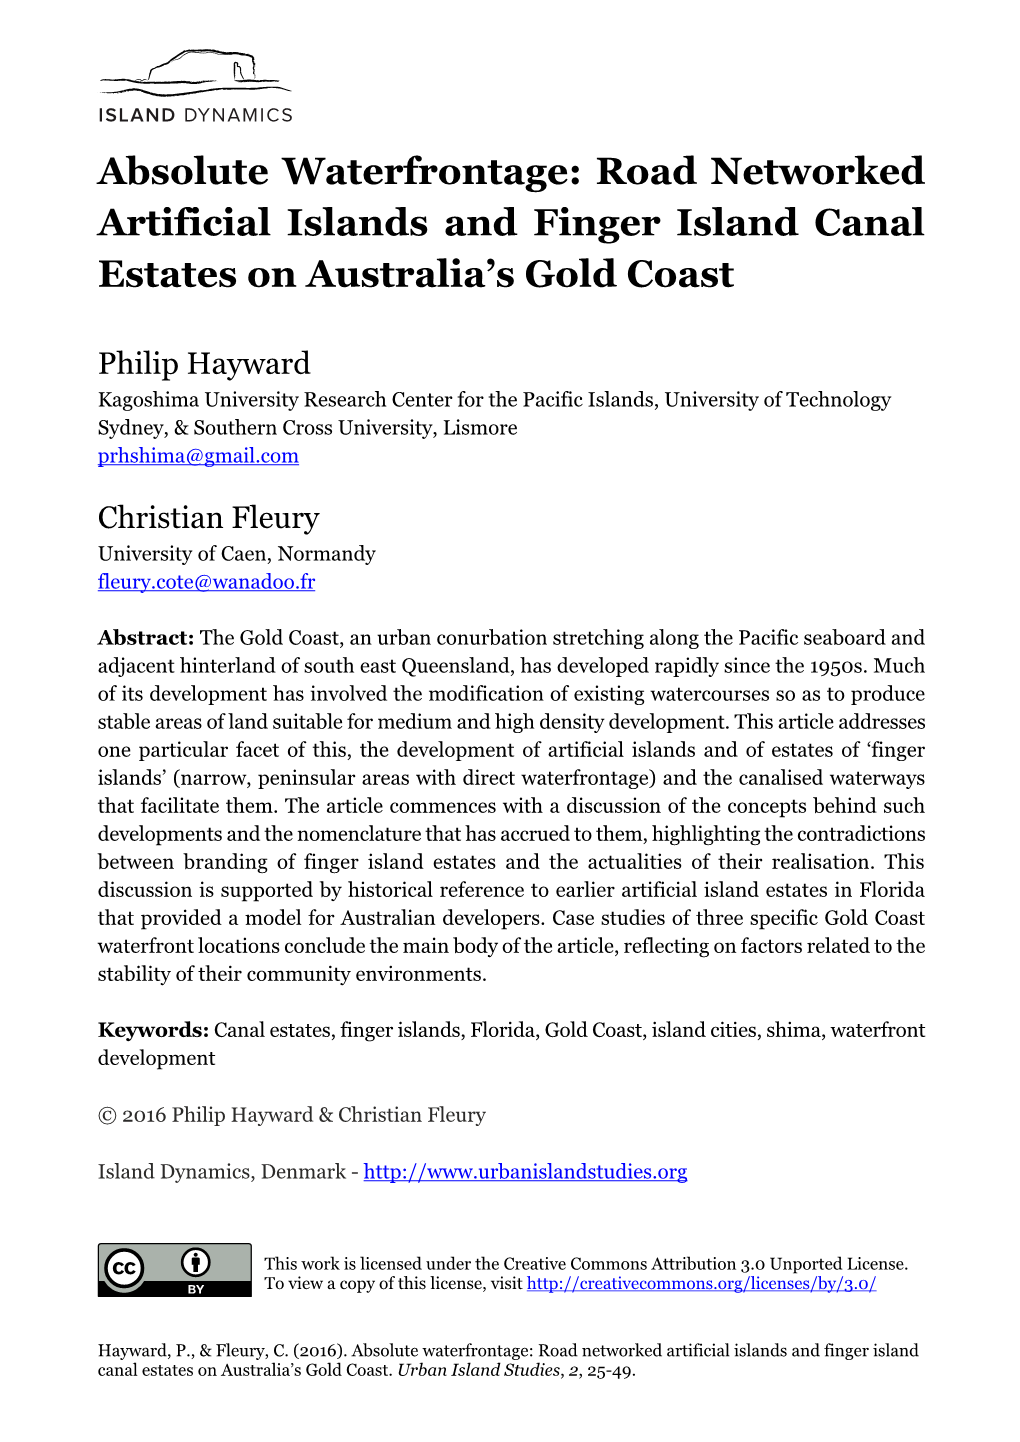 Road Networked Artificial Islands and Finger Island Canal Estates on Australia’S Gold Coast